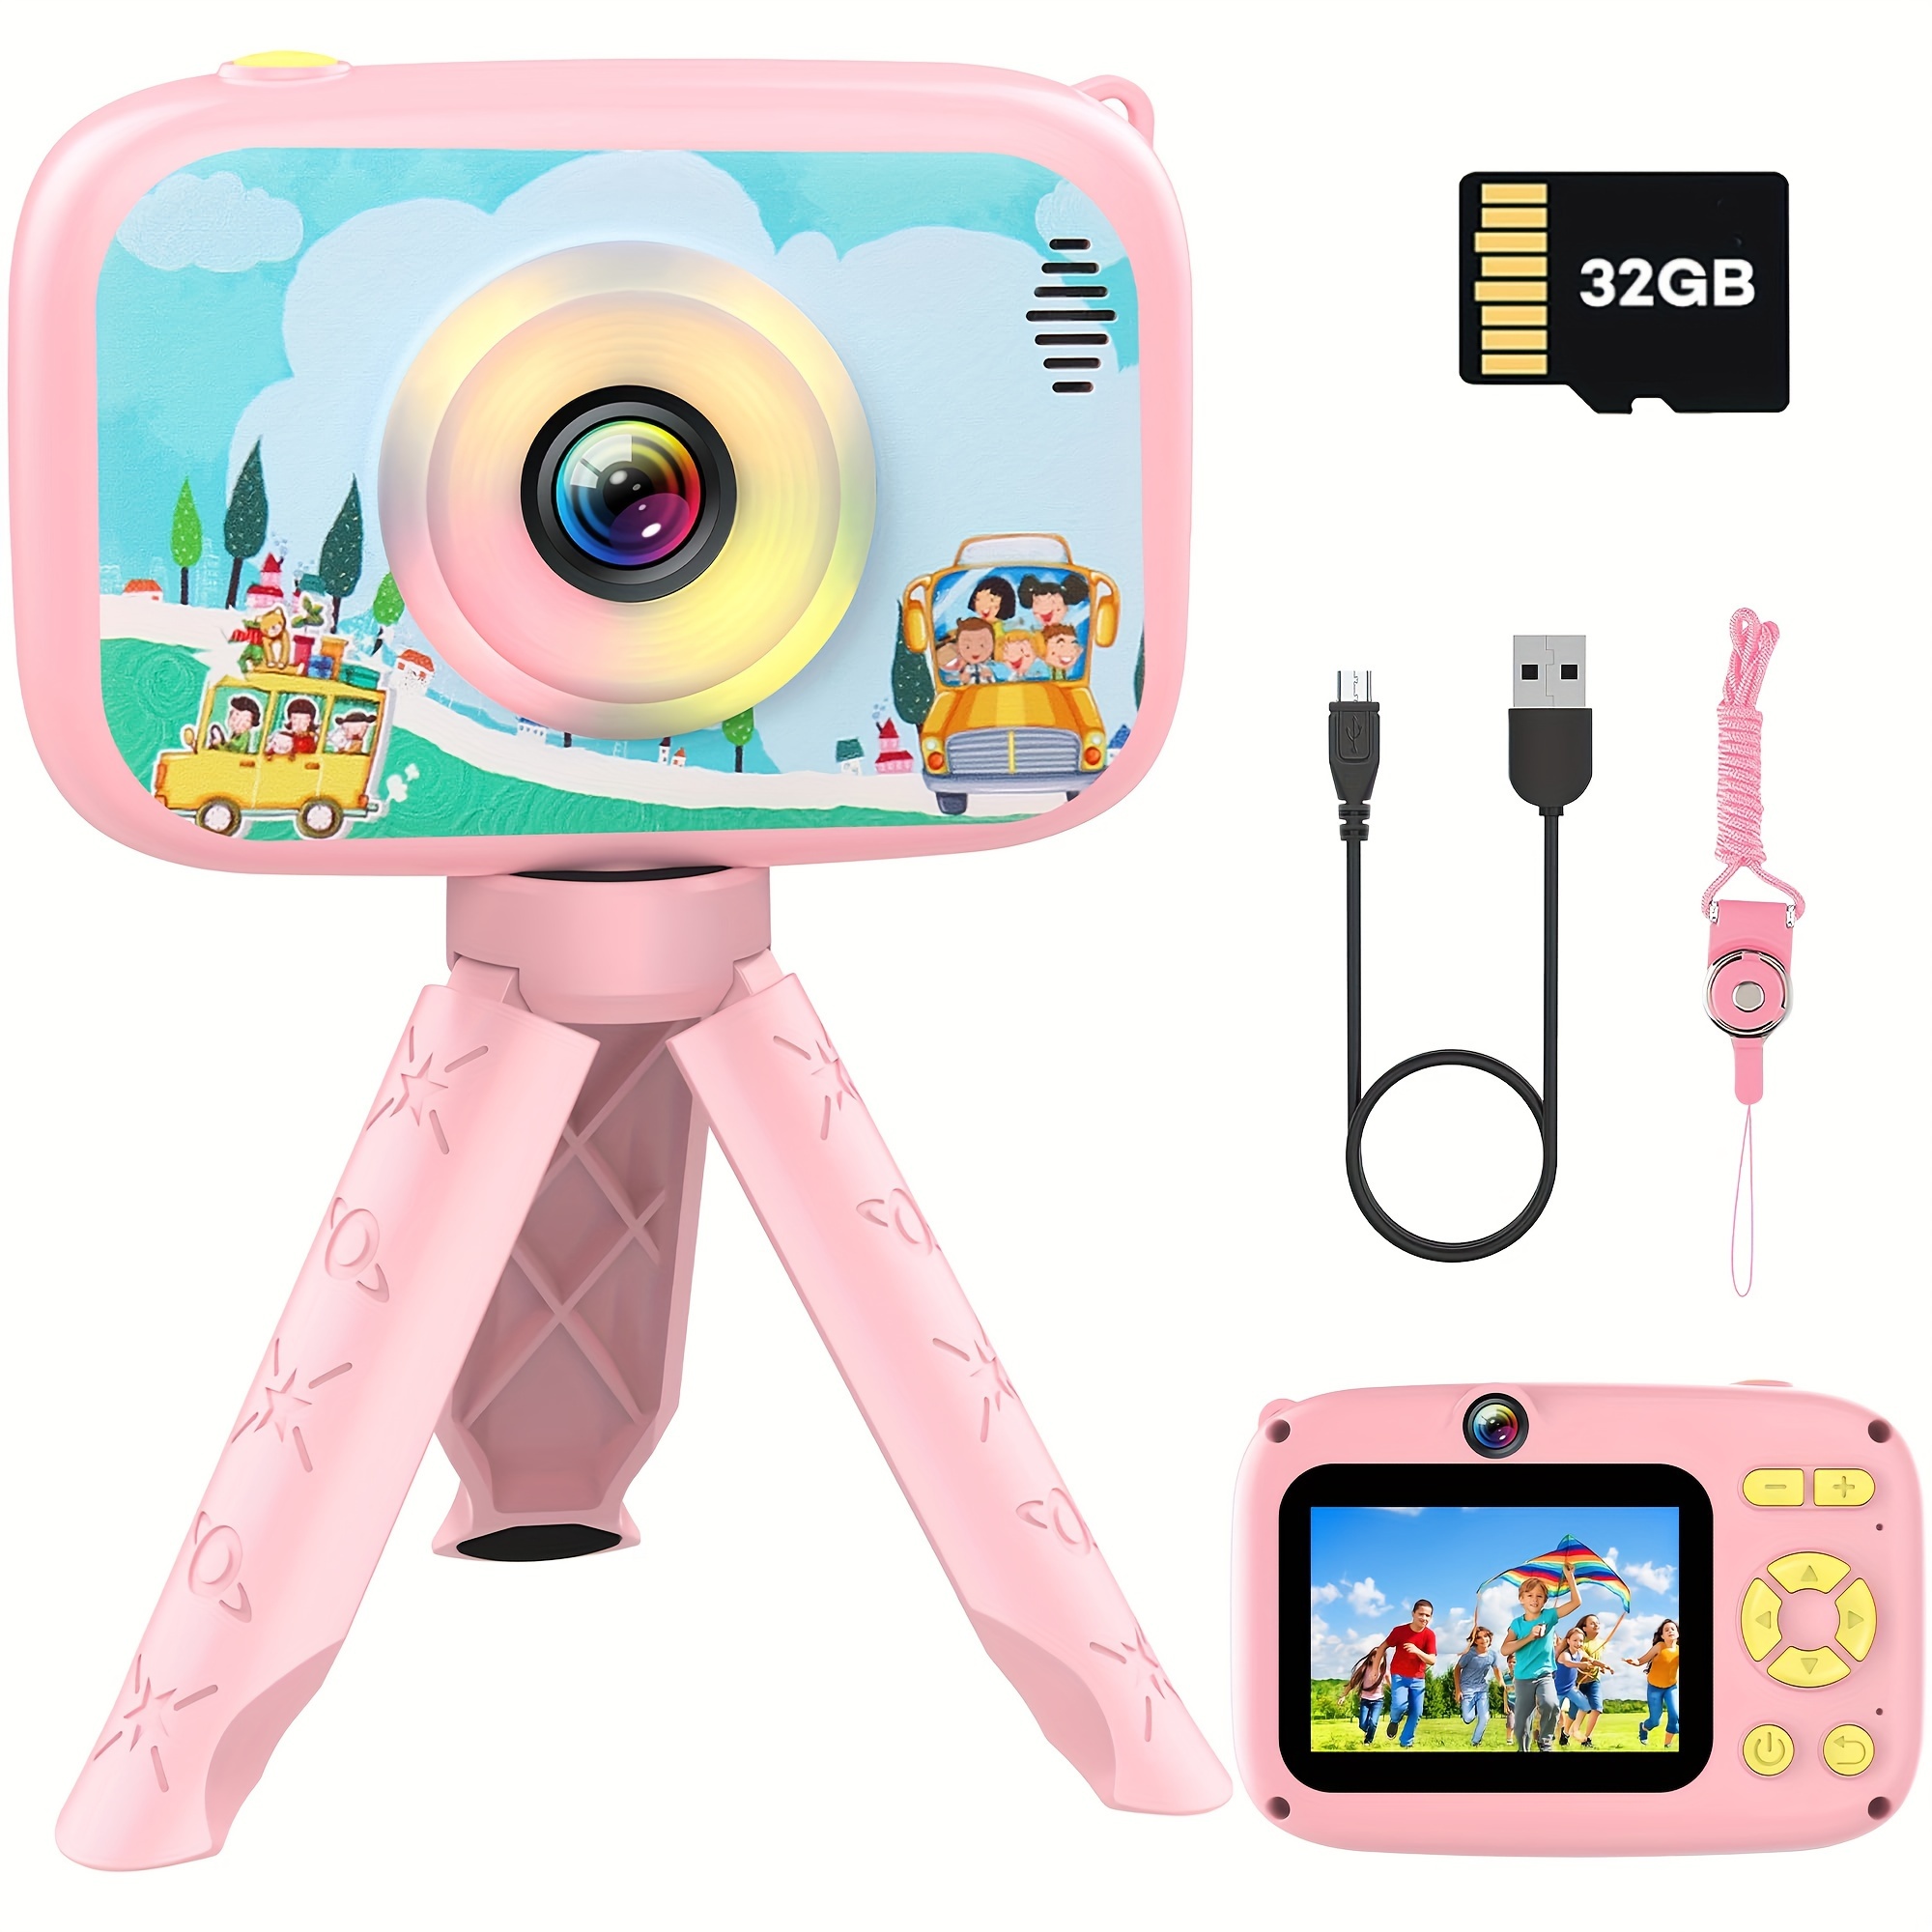 

Kids Camera Toys For 3-12 Years Old Girls Boys Christmas Birthday Gifts For Toddlers, 40mp Hd Selfie Digital Video Camera With 32gb Sd Card